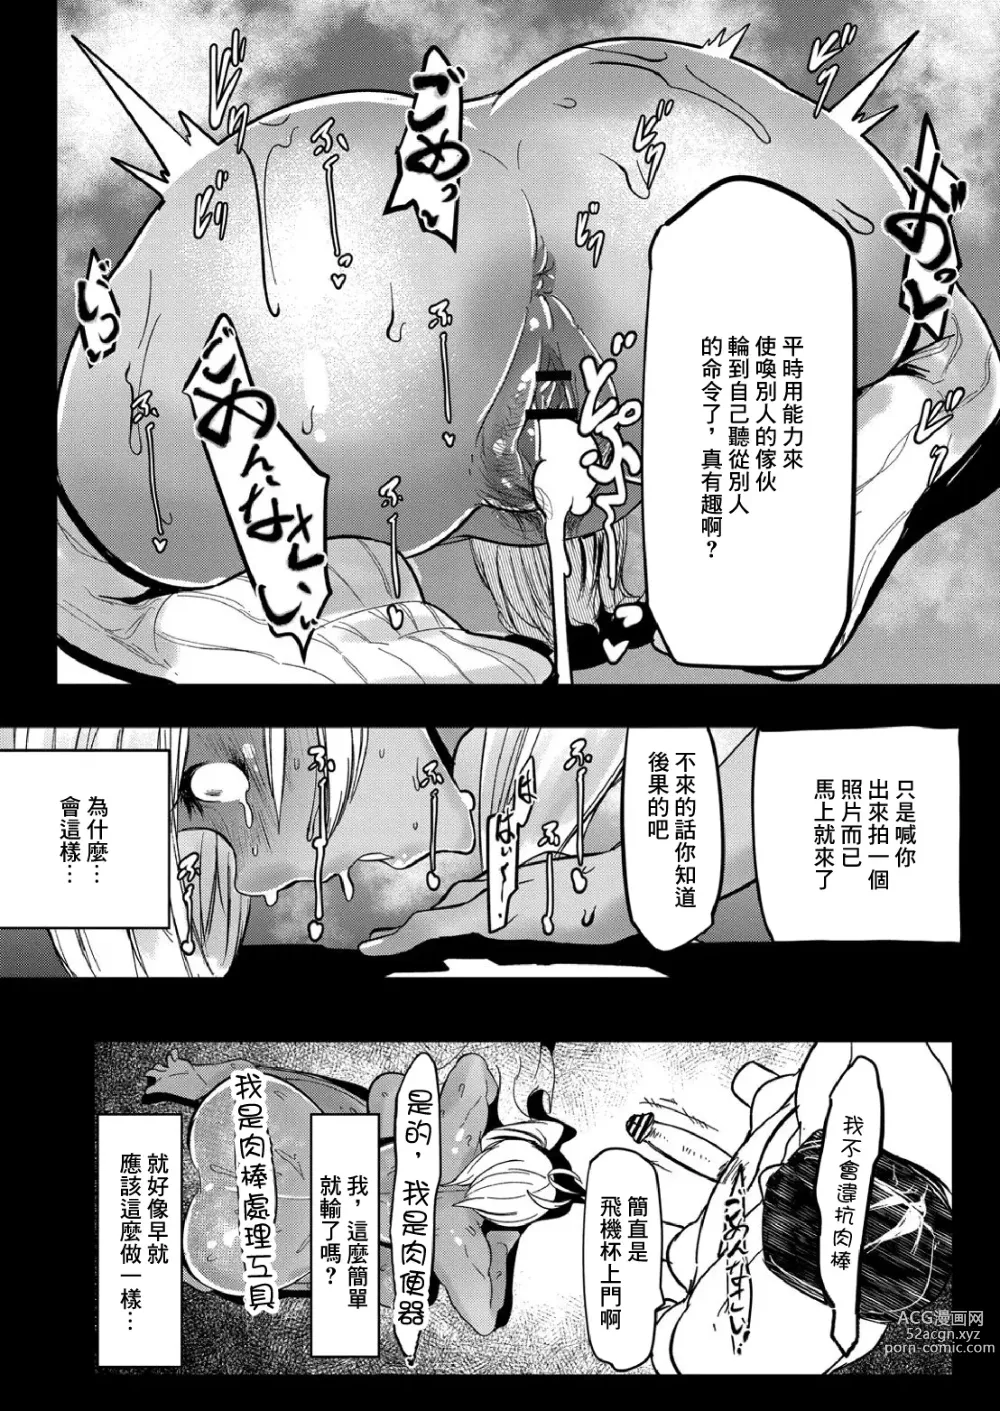 Page 6 of manga HERO DAY TIME Ch. 7